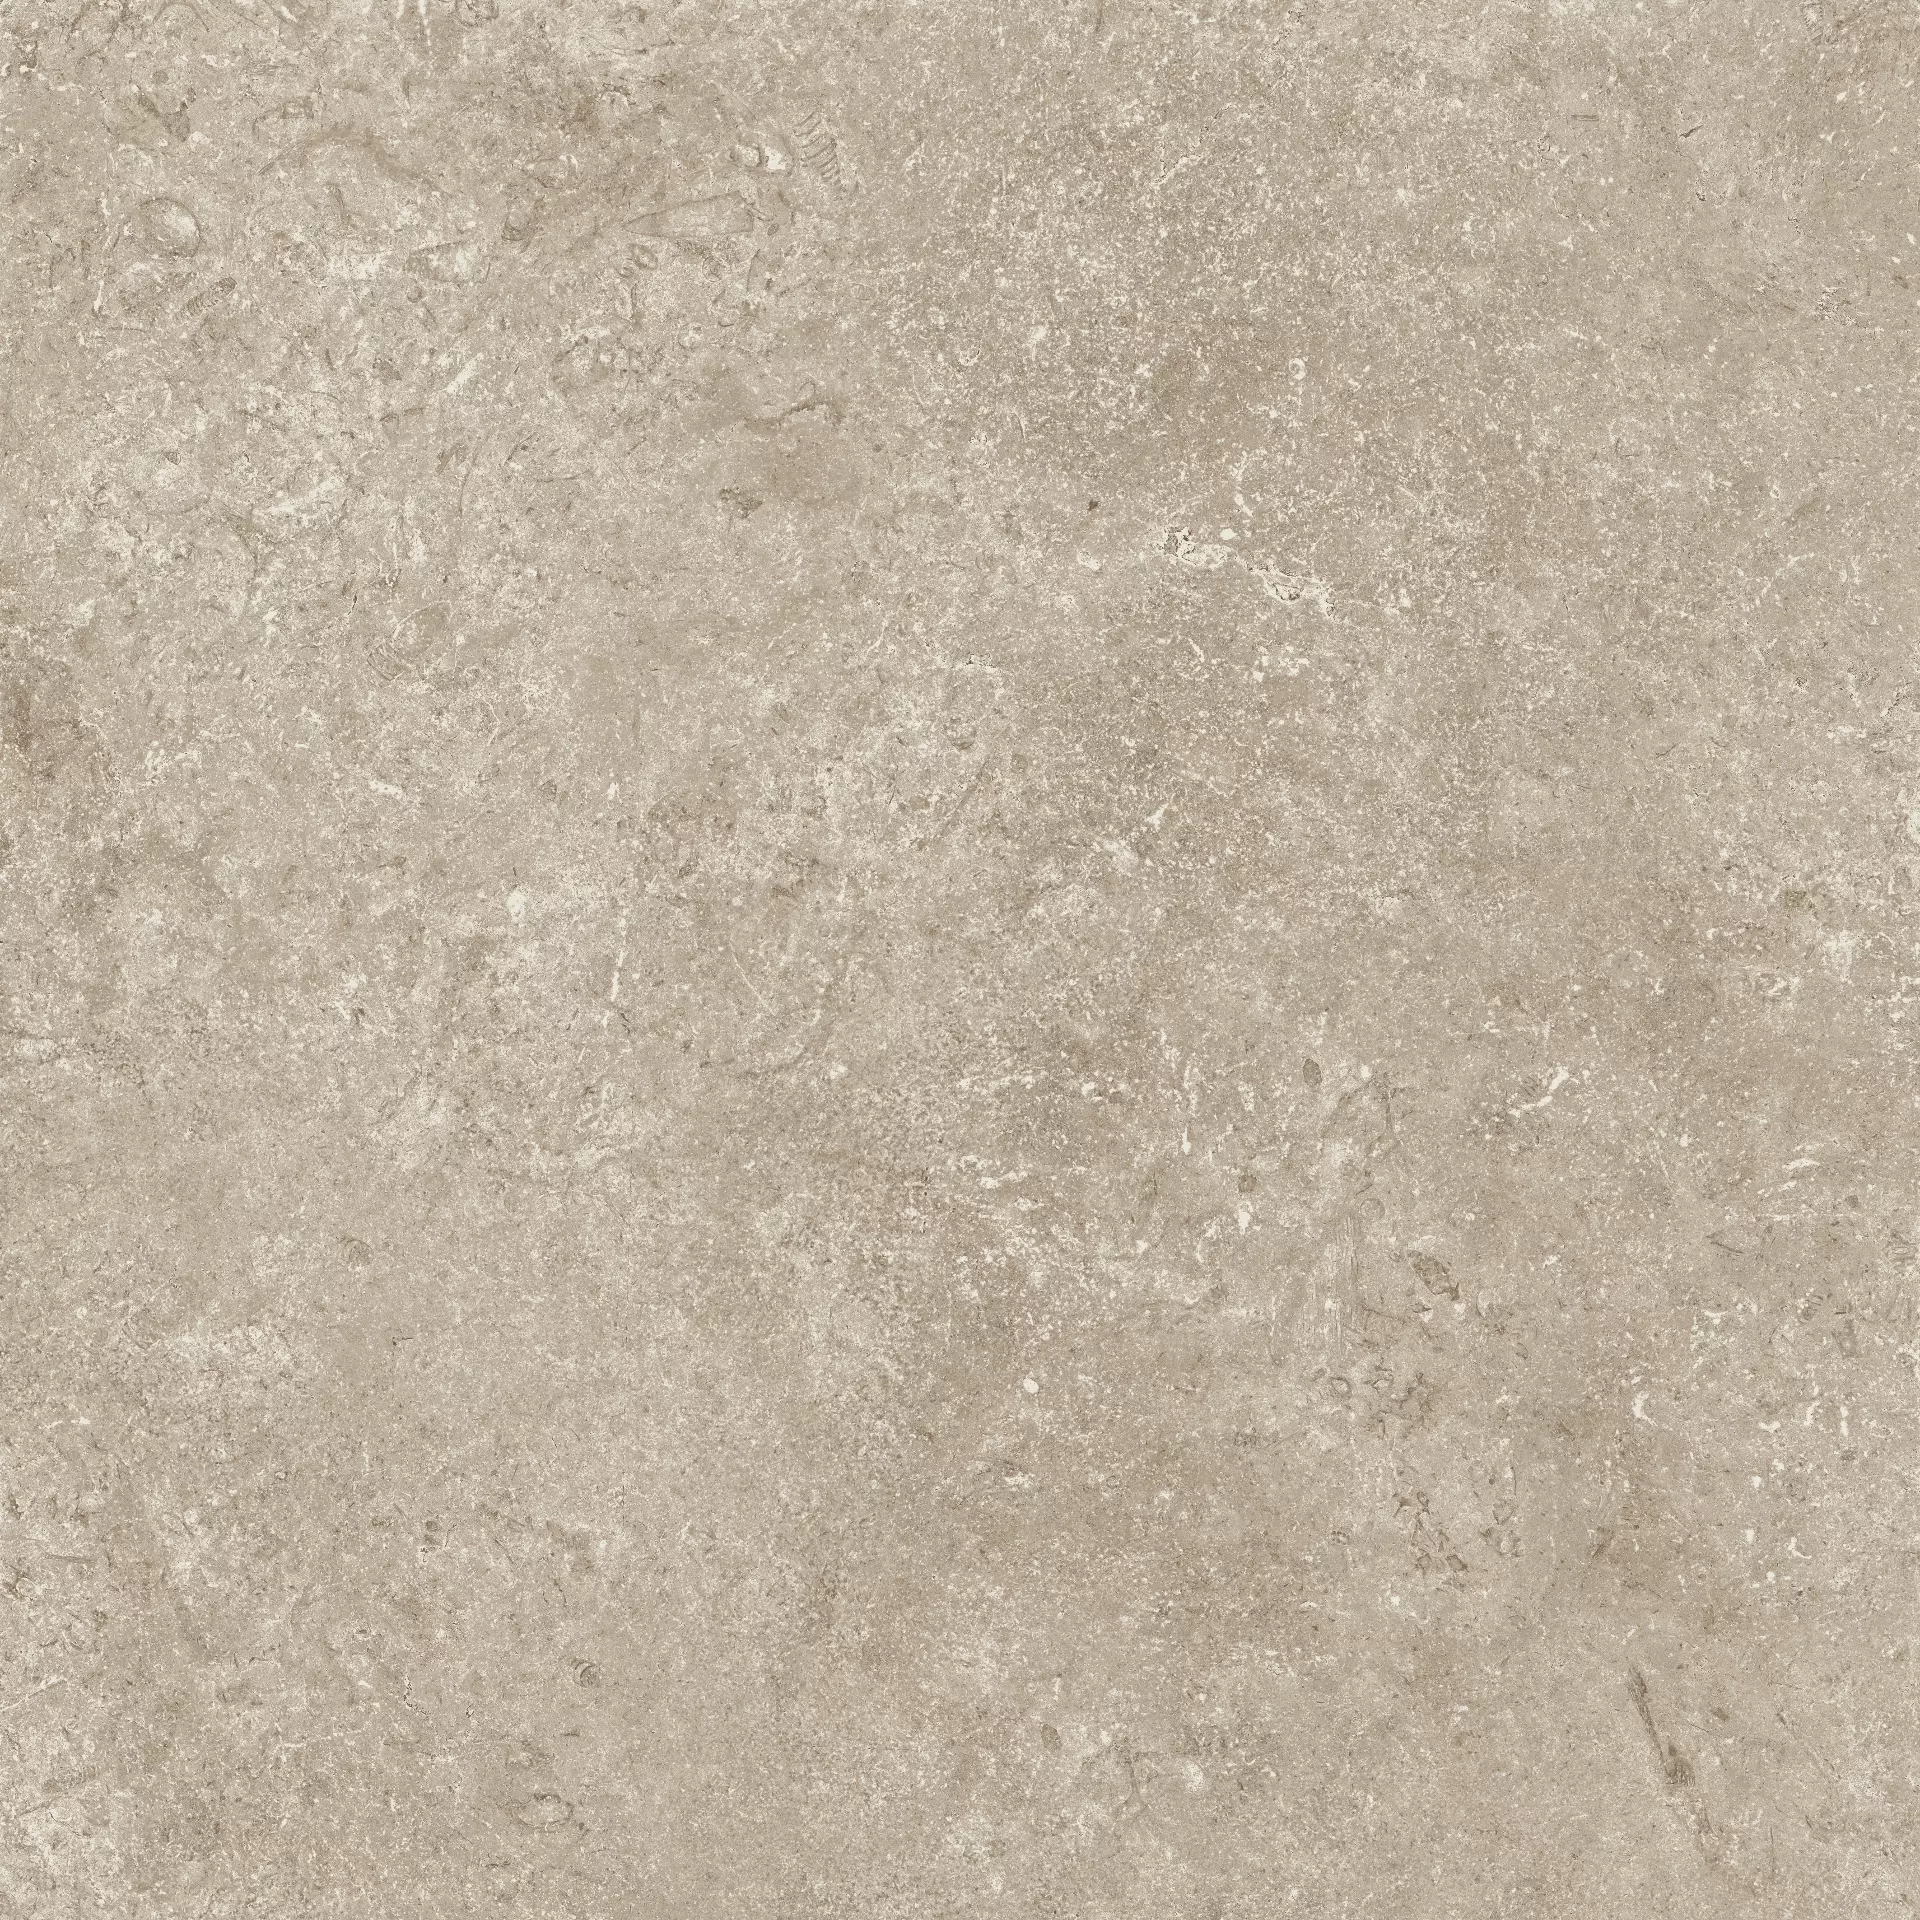 Cottodeste Secret Stone Shadow Grey Naturale Protect EGGSS30 90x90cm rectified 14mm